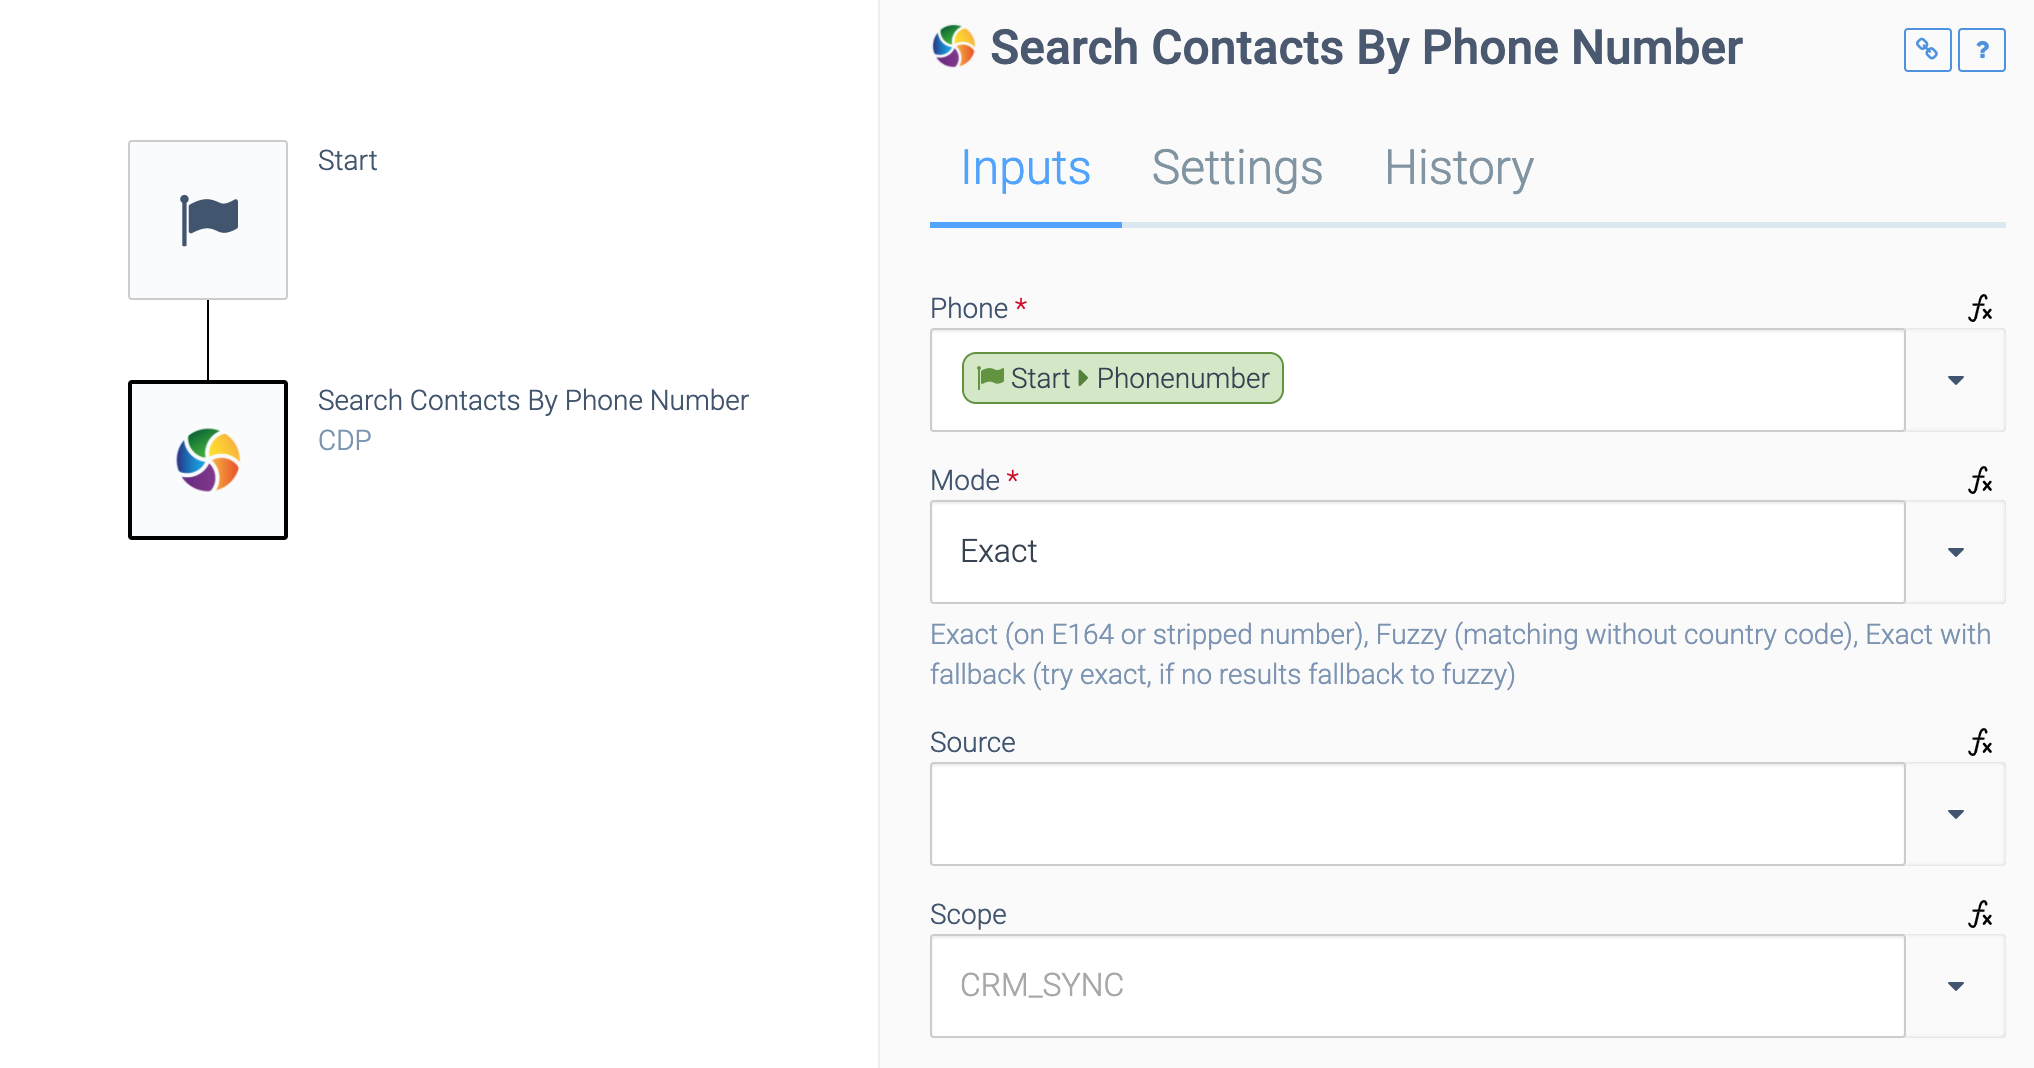 an automation consisting of a Start block and a Search Contacts By Phone Number block. The Search Contacts By Phone Number block is selected. Phone is set to Start > Phonenumber.